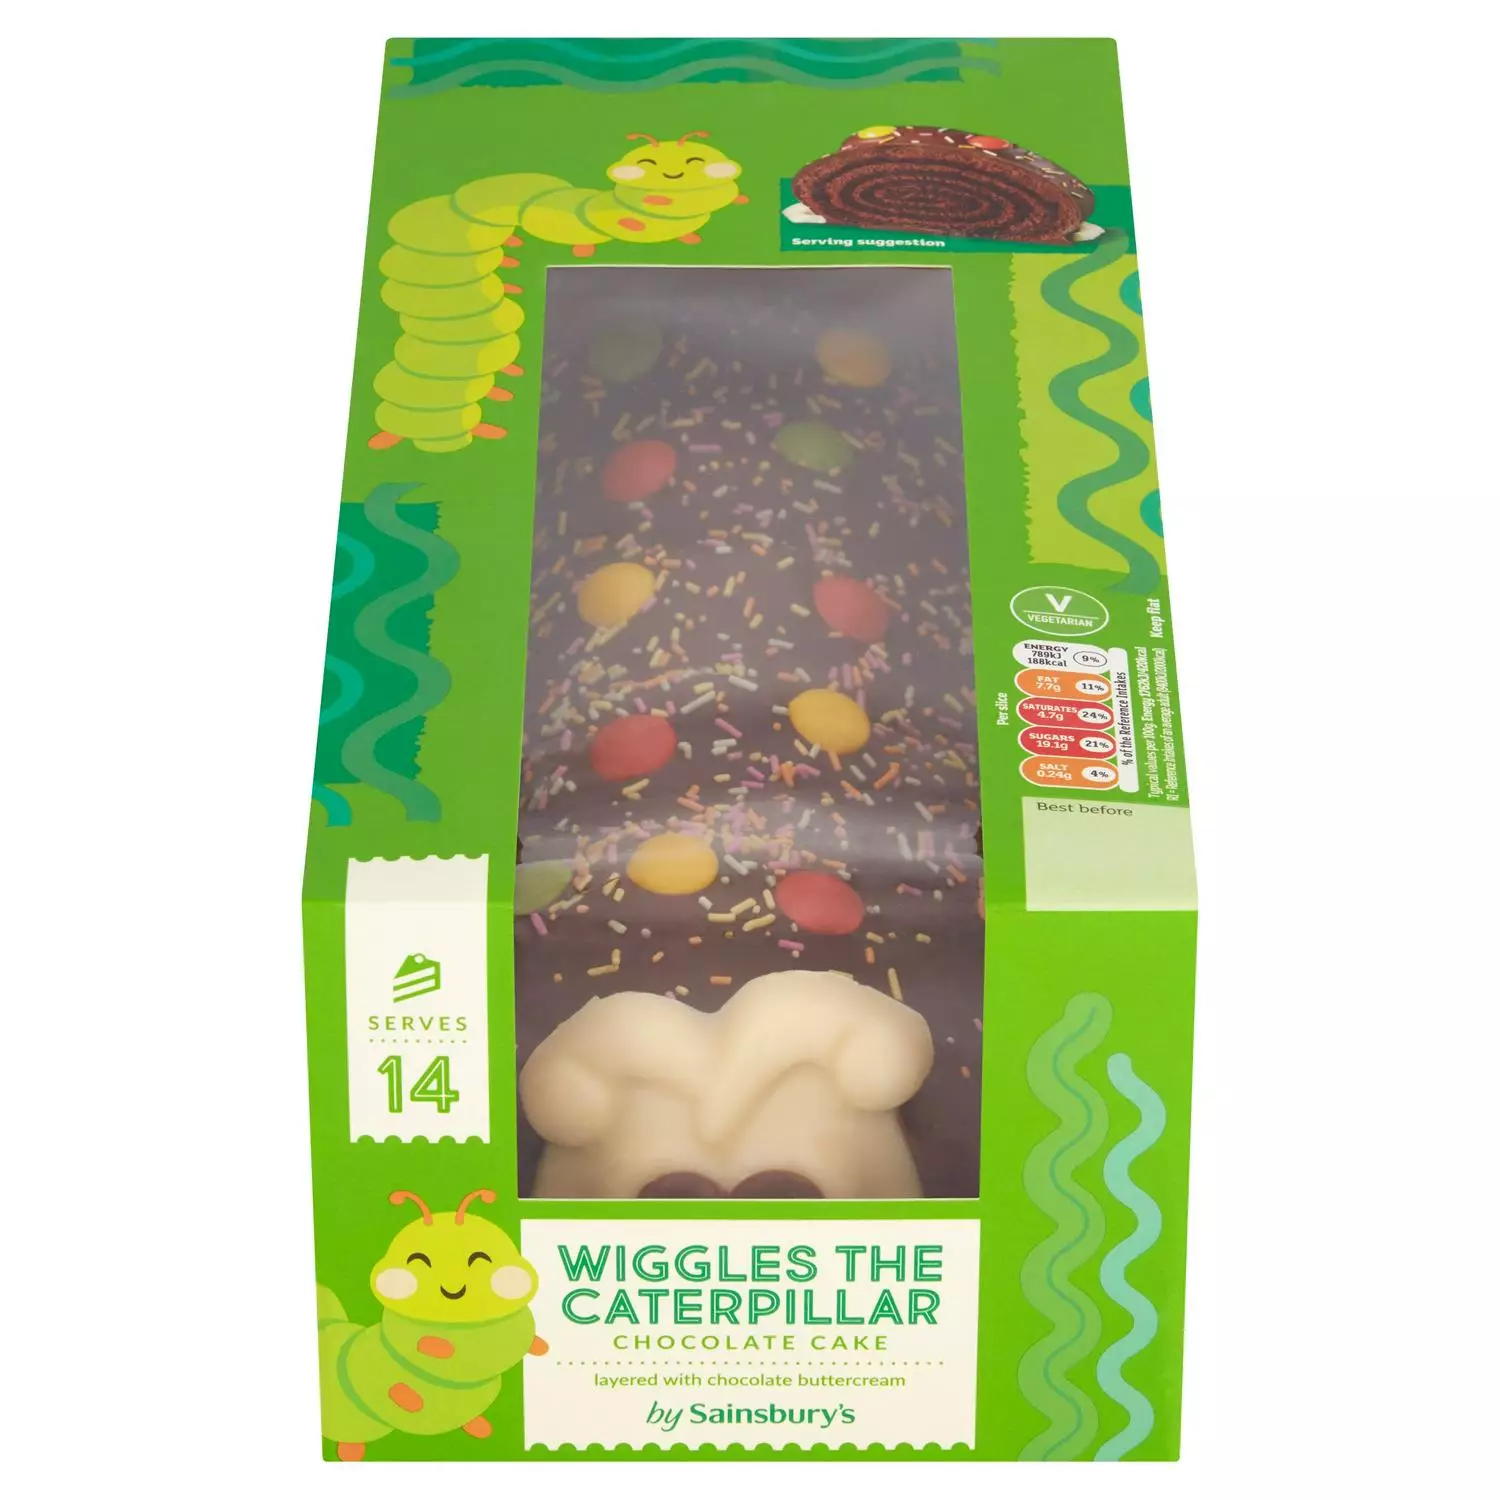 Wiggles the Caterpillar was our winner (